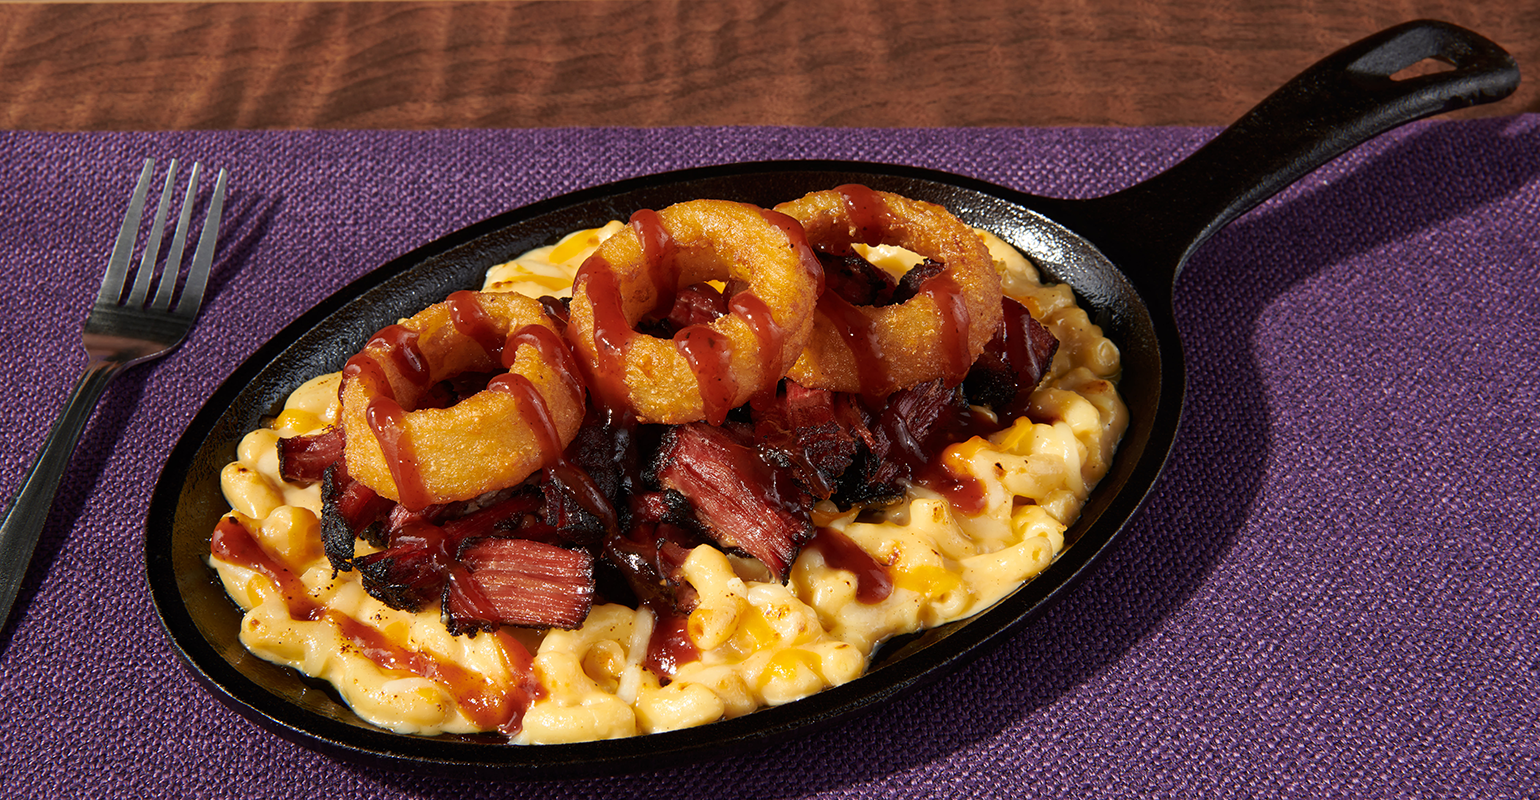 Denny's New Limited-Time Menu Red, White and Bacon Has Arrived  #DennysDiners